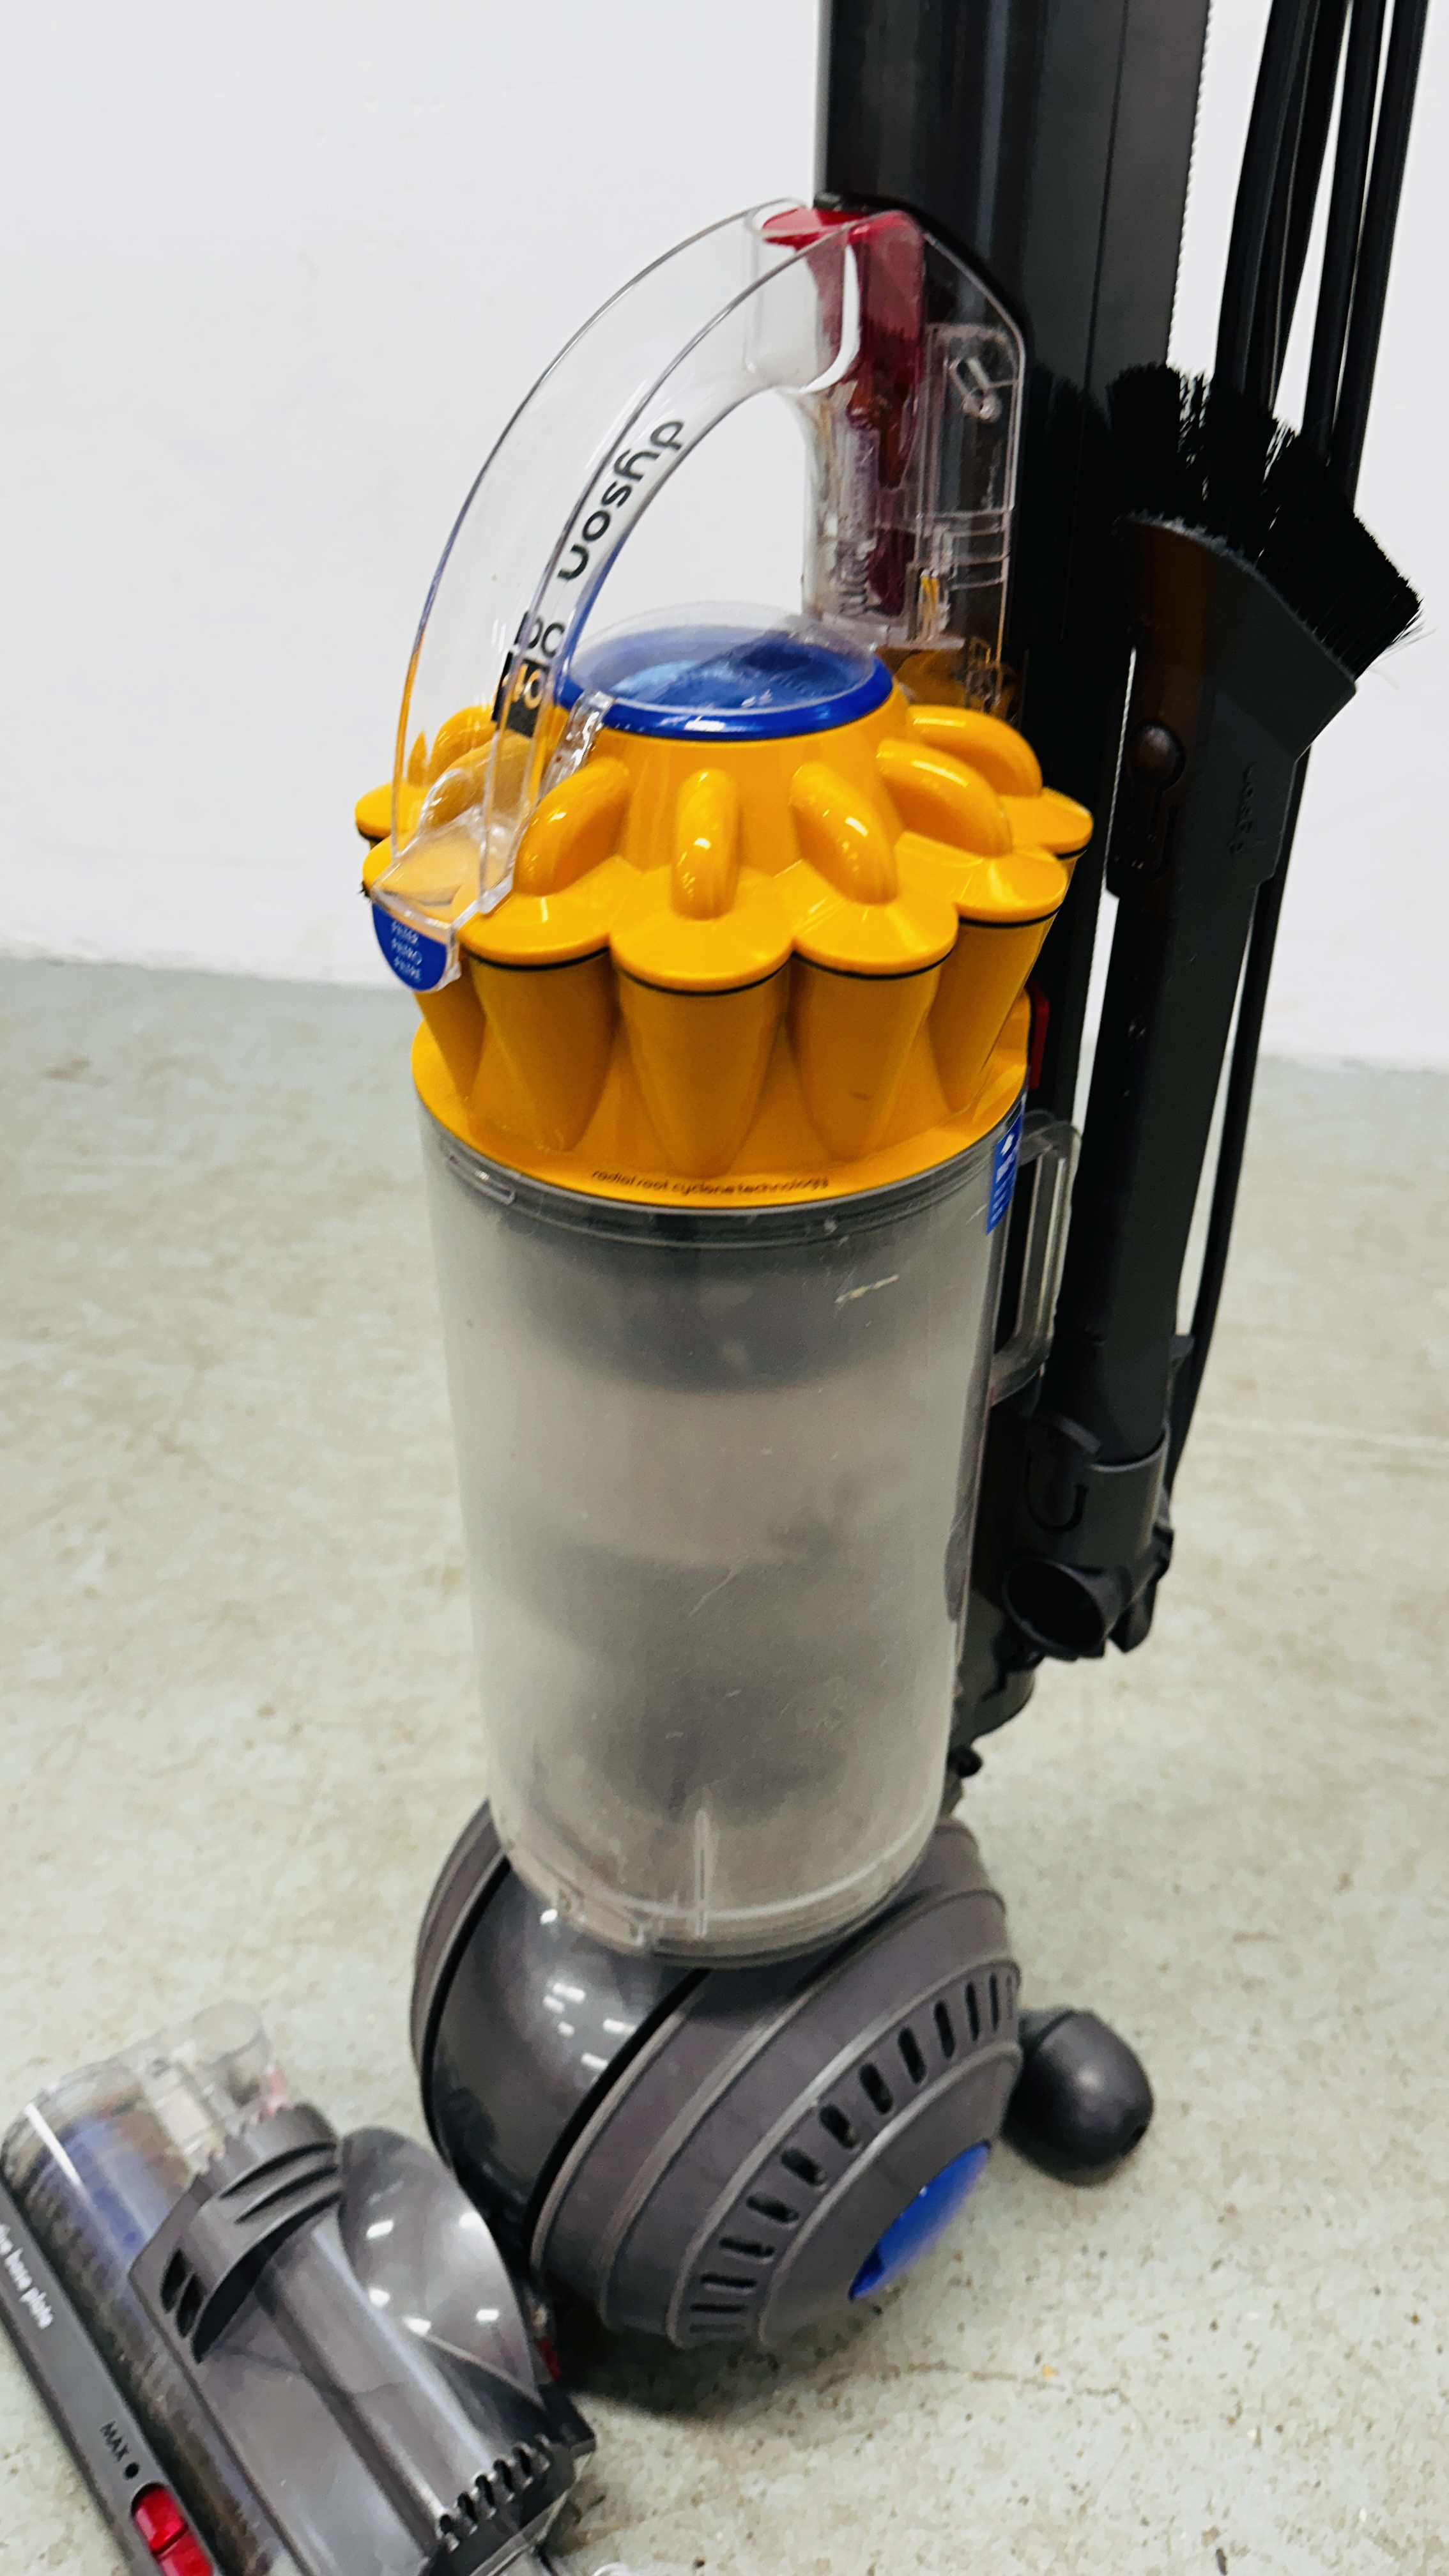 A DYSON DC 40 UPRIGHT VACUUM CLEANER - SOLD AS SEEN. - Bild 3 aus 5